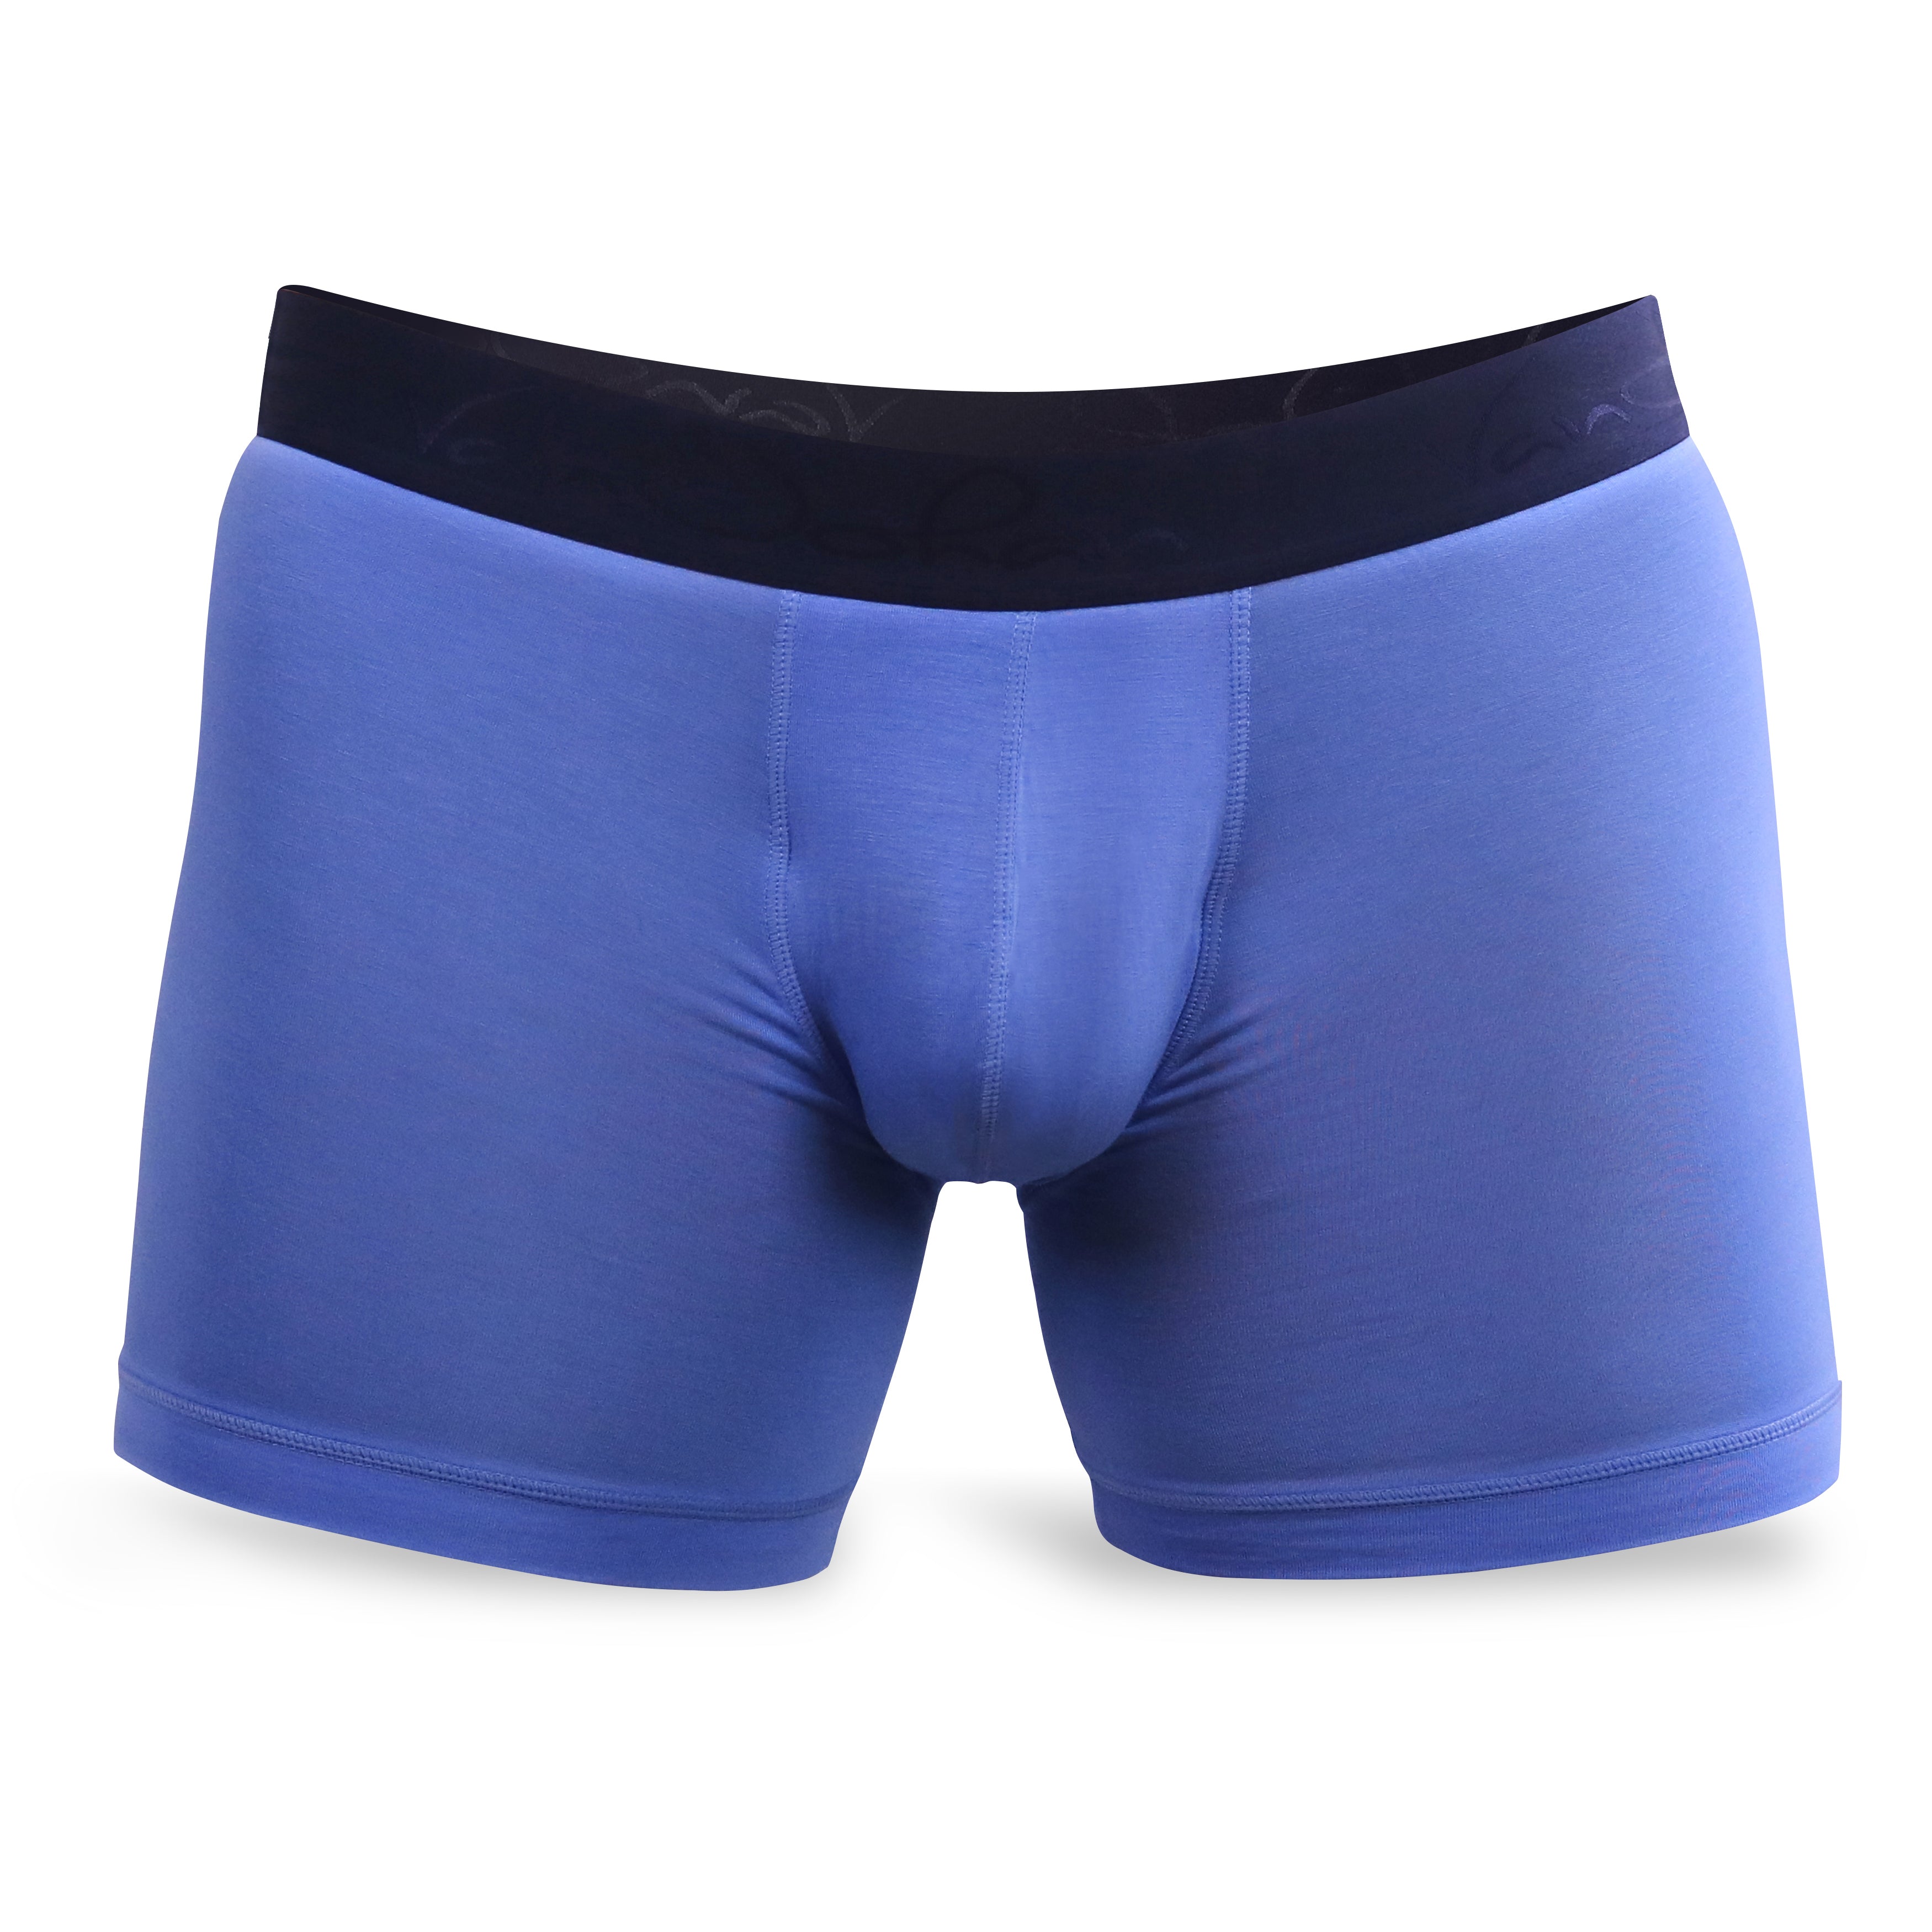 Runderwear Review - Will these prevent chafing? 